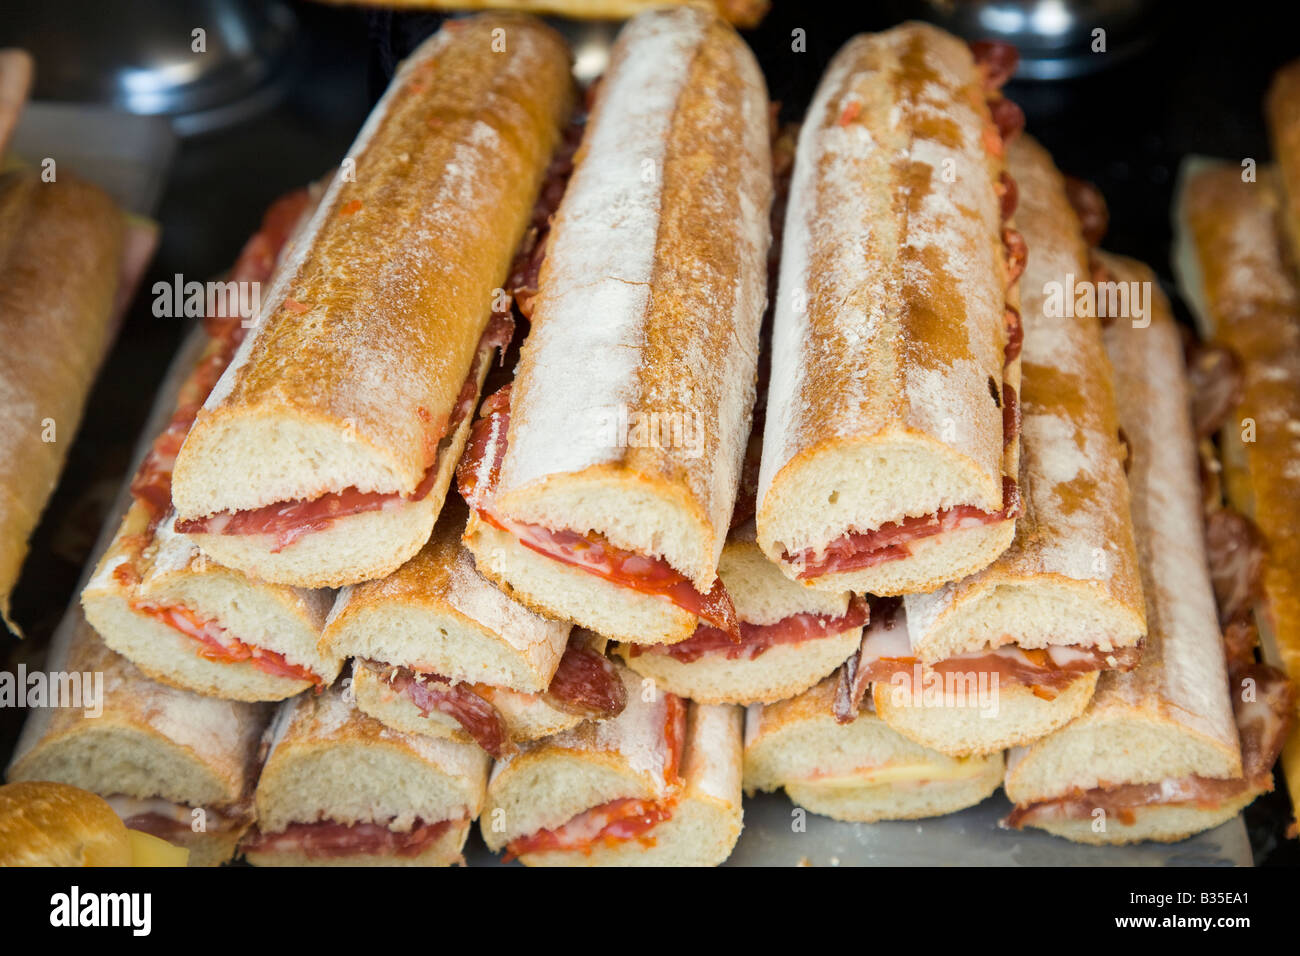 SPAIN Barcelona Ham on bread sandwiches displayed in store bocadillo with jamon traditional Spanish food Stock Photo